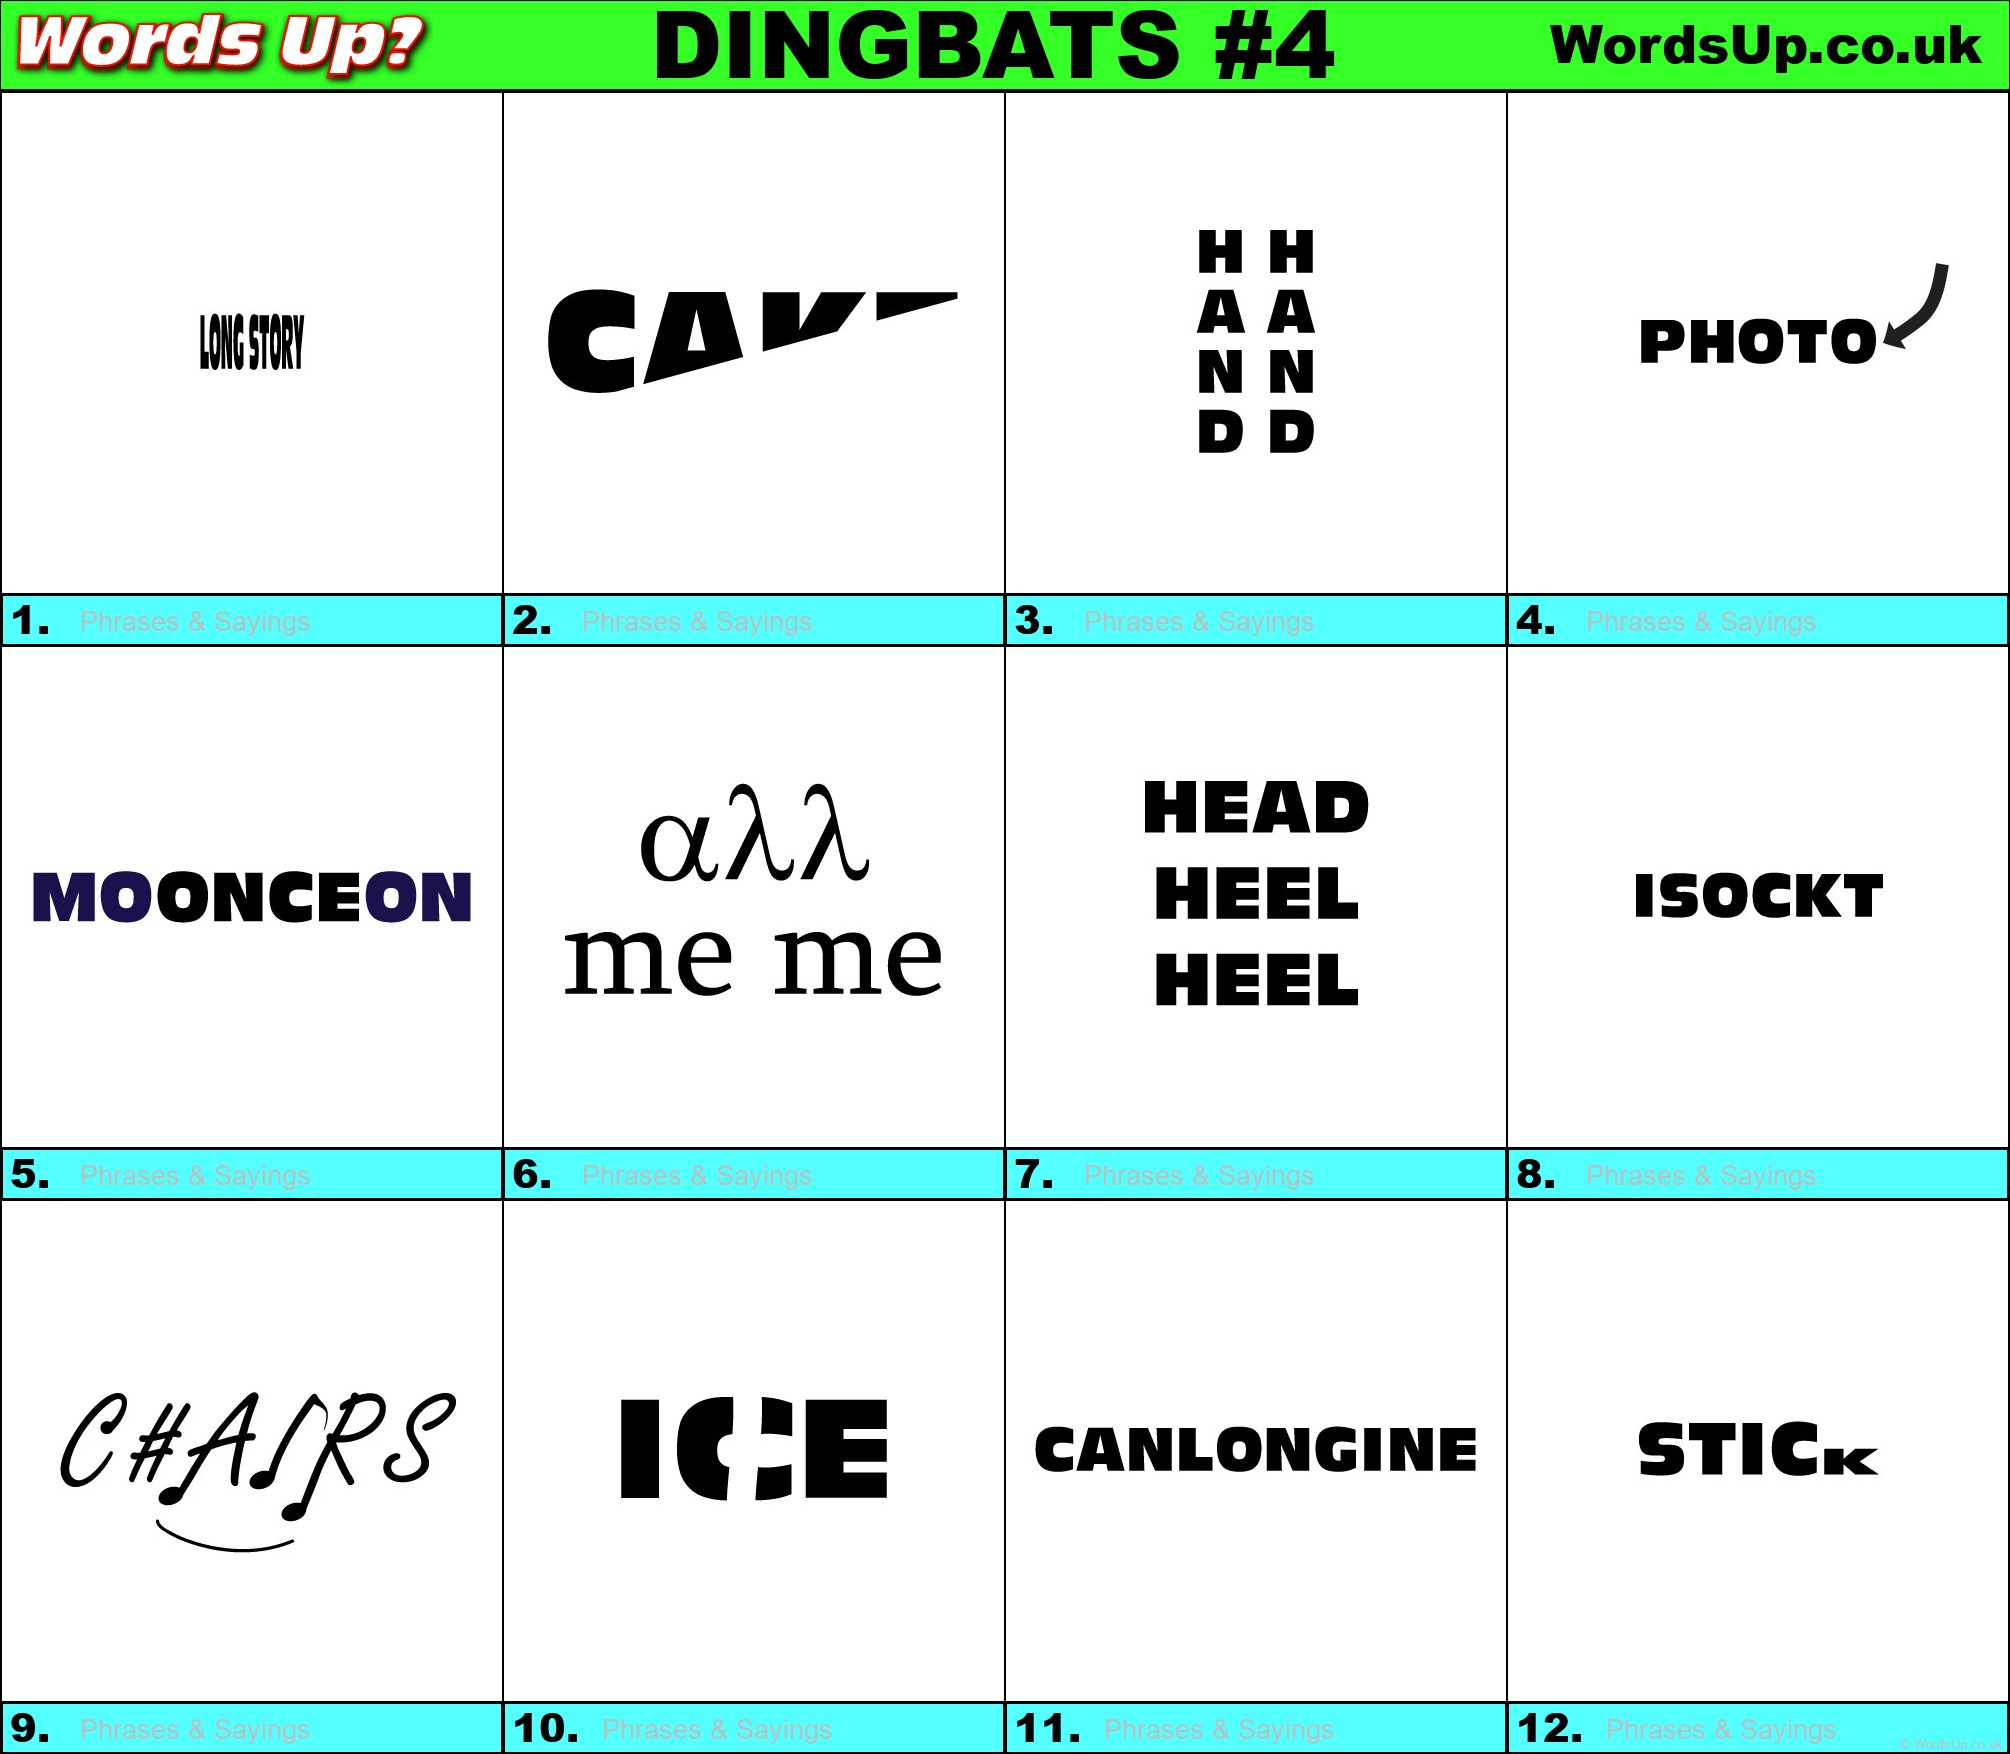 Dingbats Quiz 4 Find The Answers To Over 730 Dingbats Words Up Games